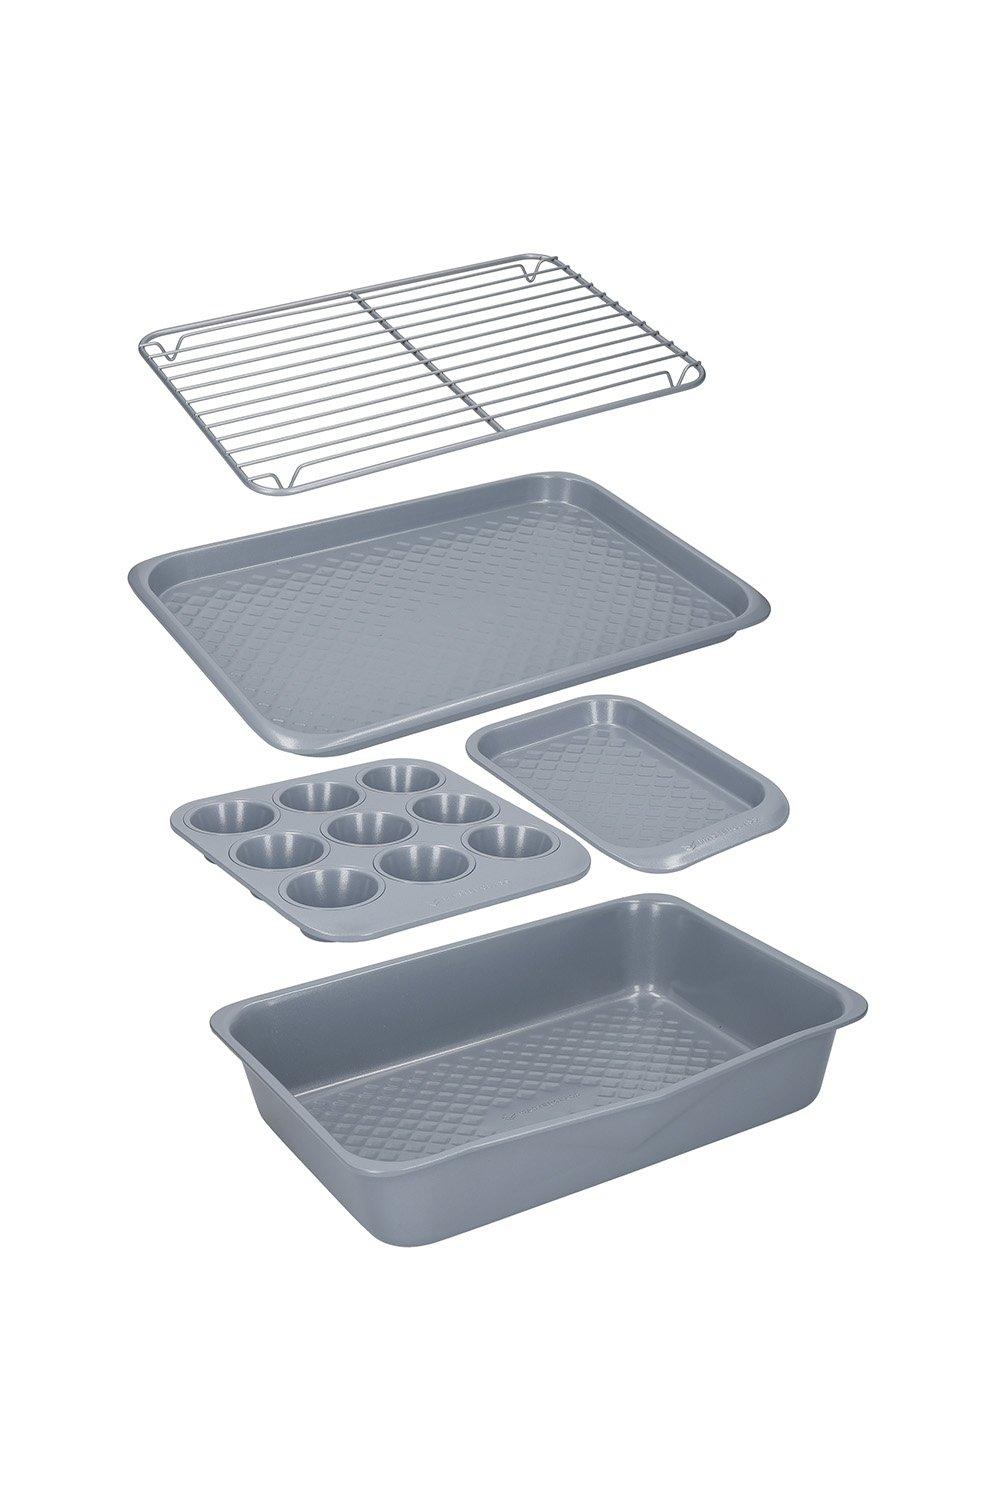 Smart Ceramic 5-Piece Stackable Bakeware Set with Chemical-Free Non-Stick